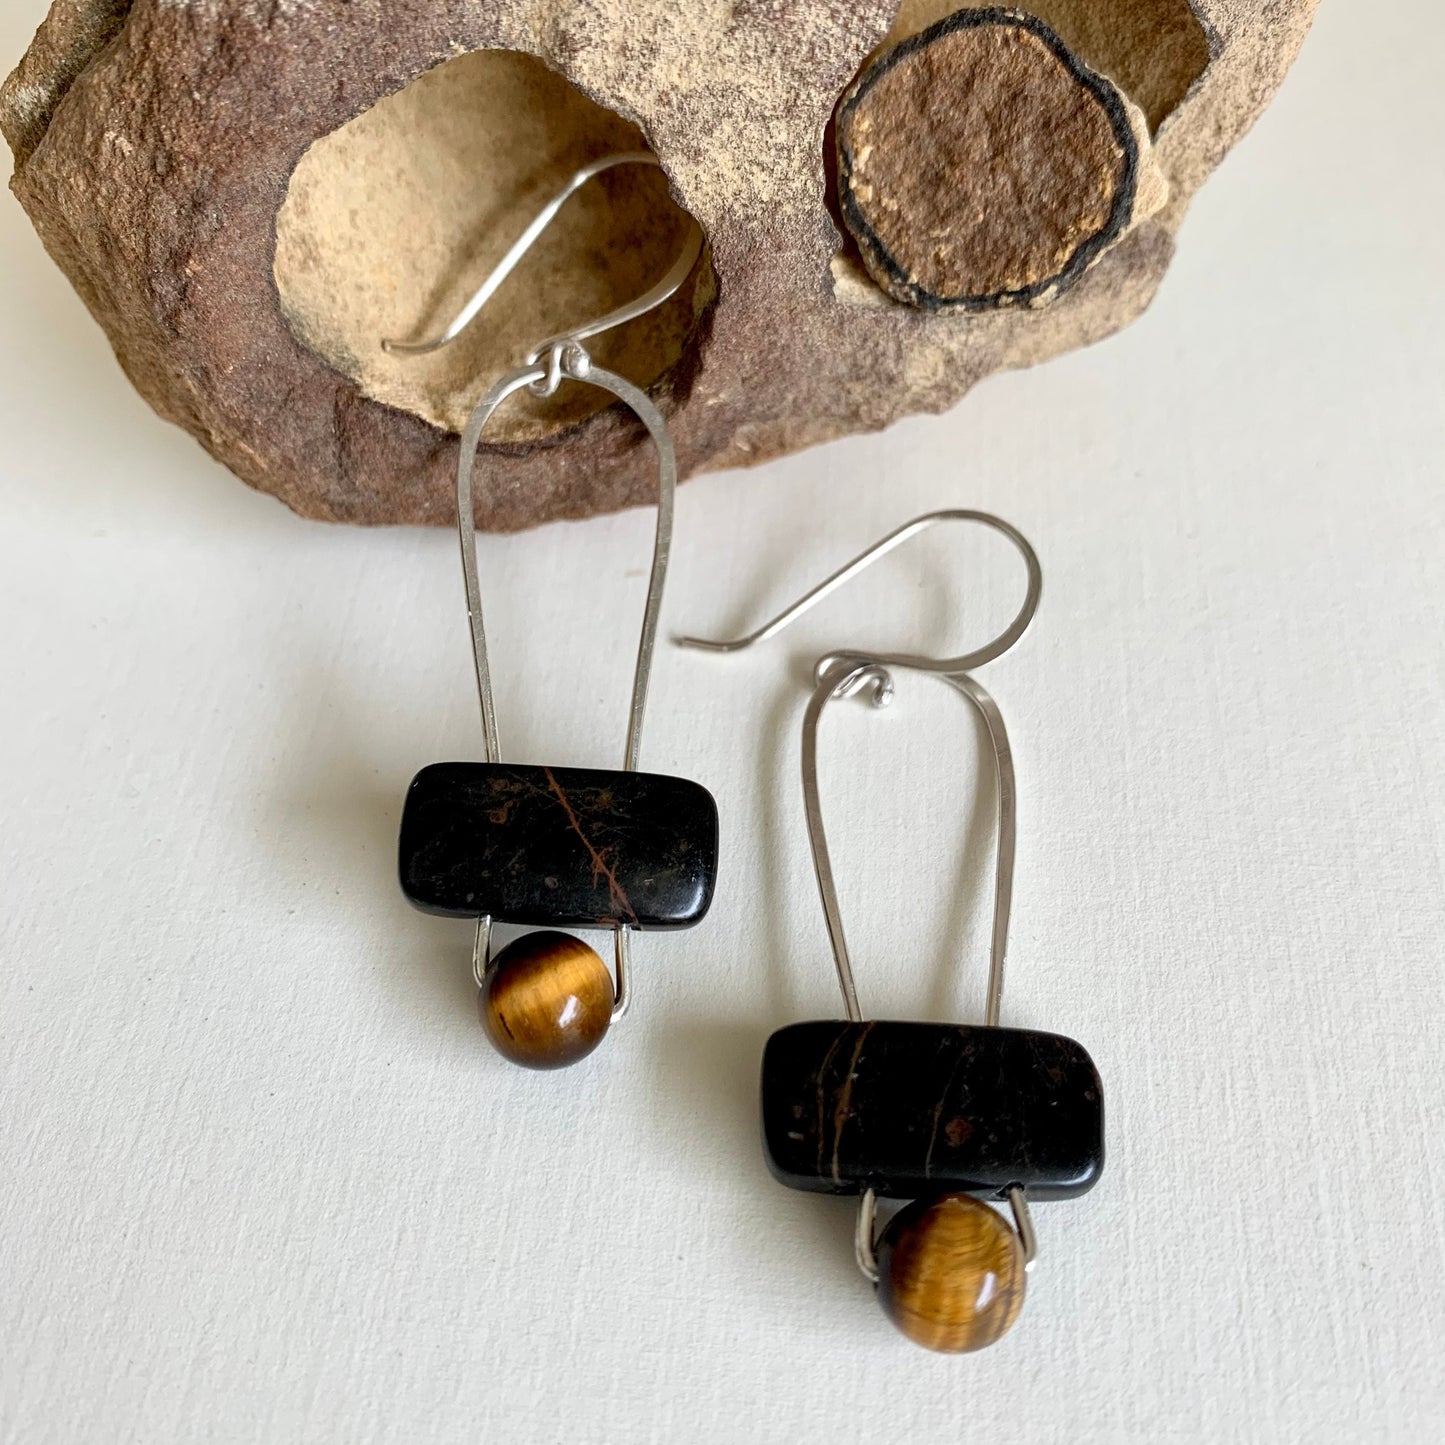 Tiger eye earrings for women - gemstone and sterling jewelry - artisan crafted, one-of-a-kind handmade earrings - earthy gemstone earrings.